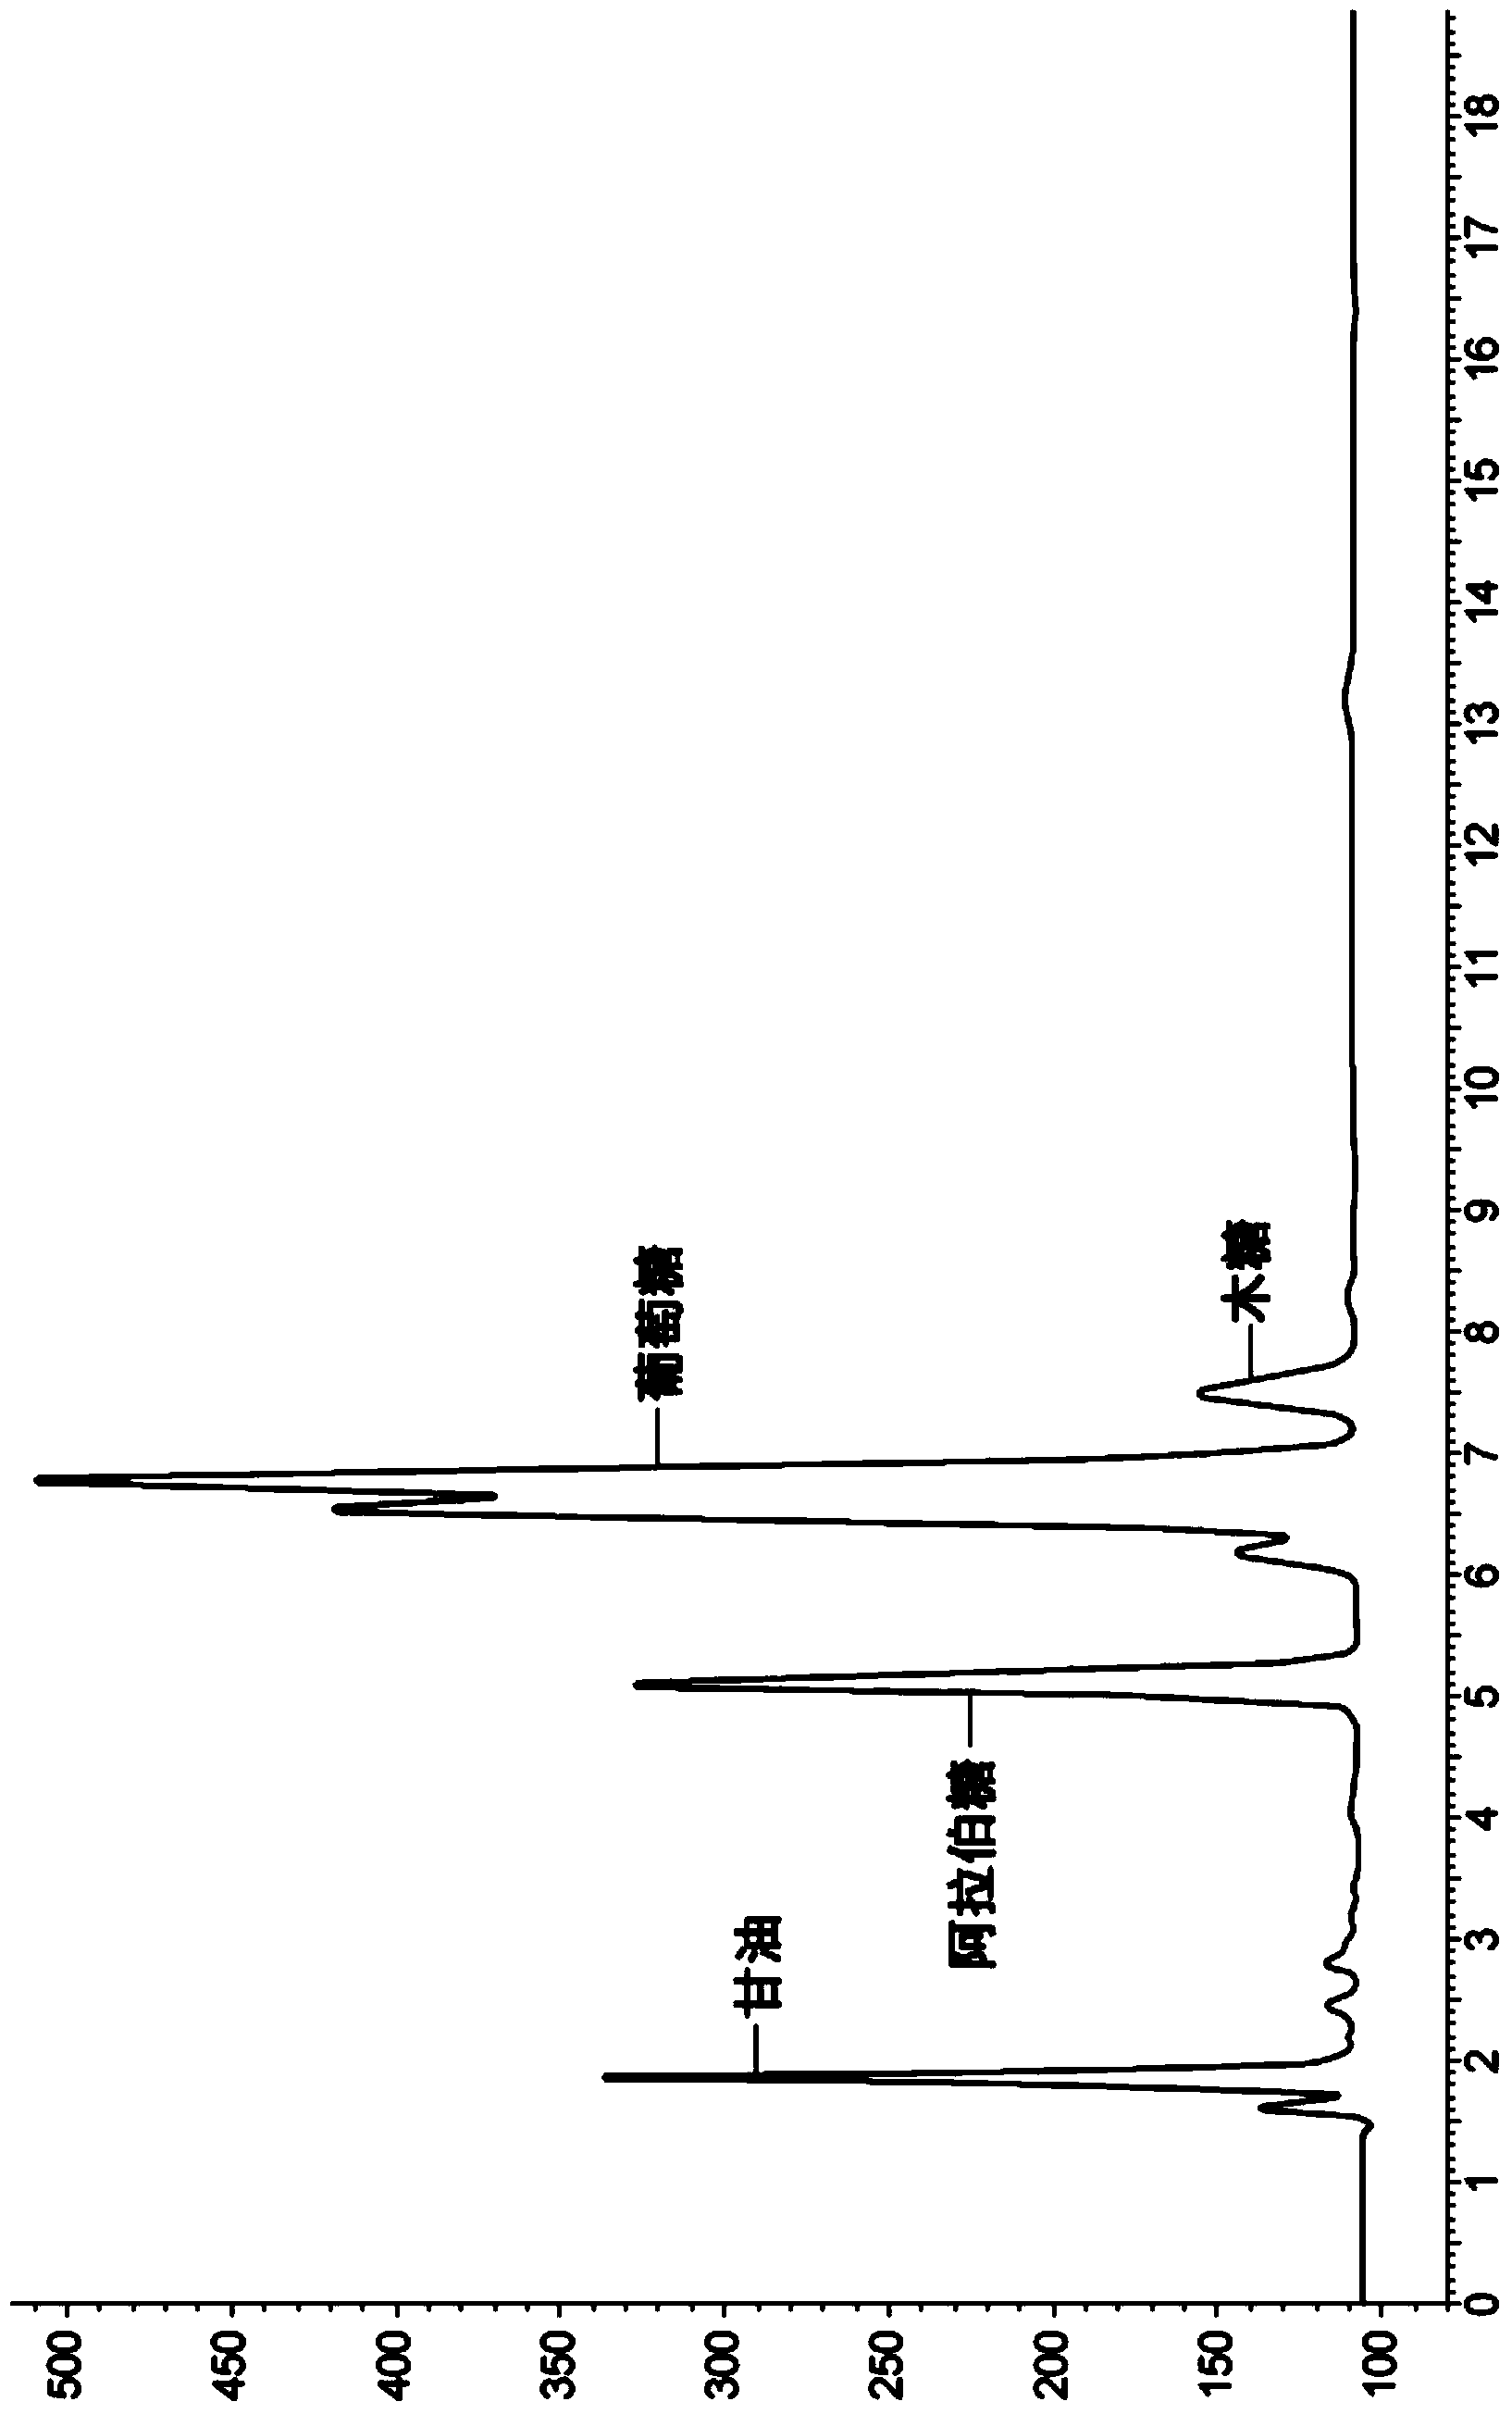 Hydrolysis and fermentation process for animal feed production